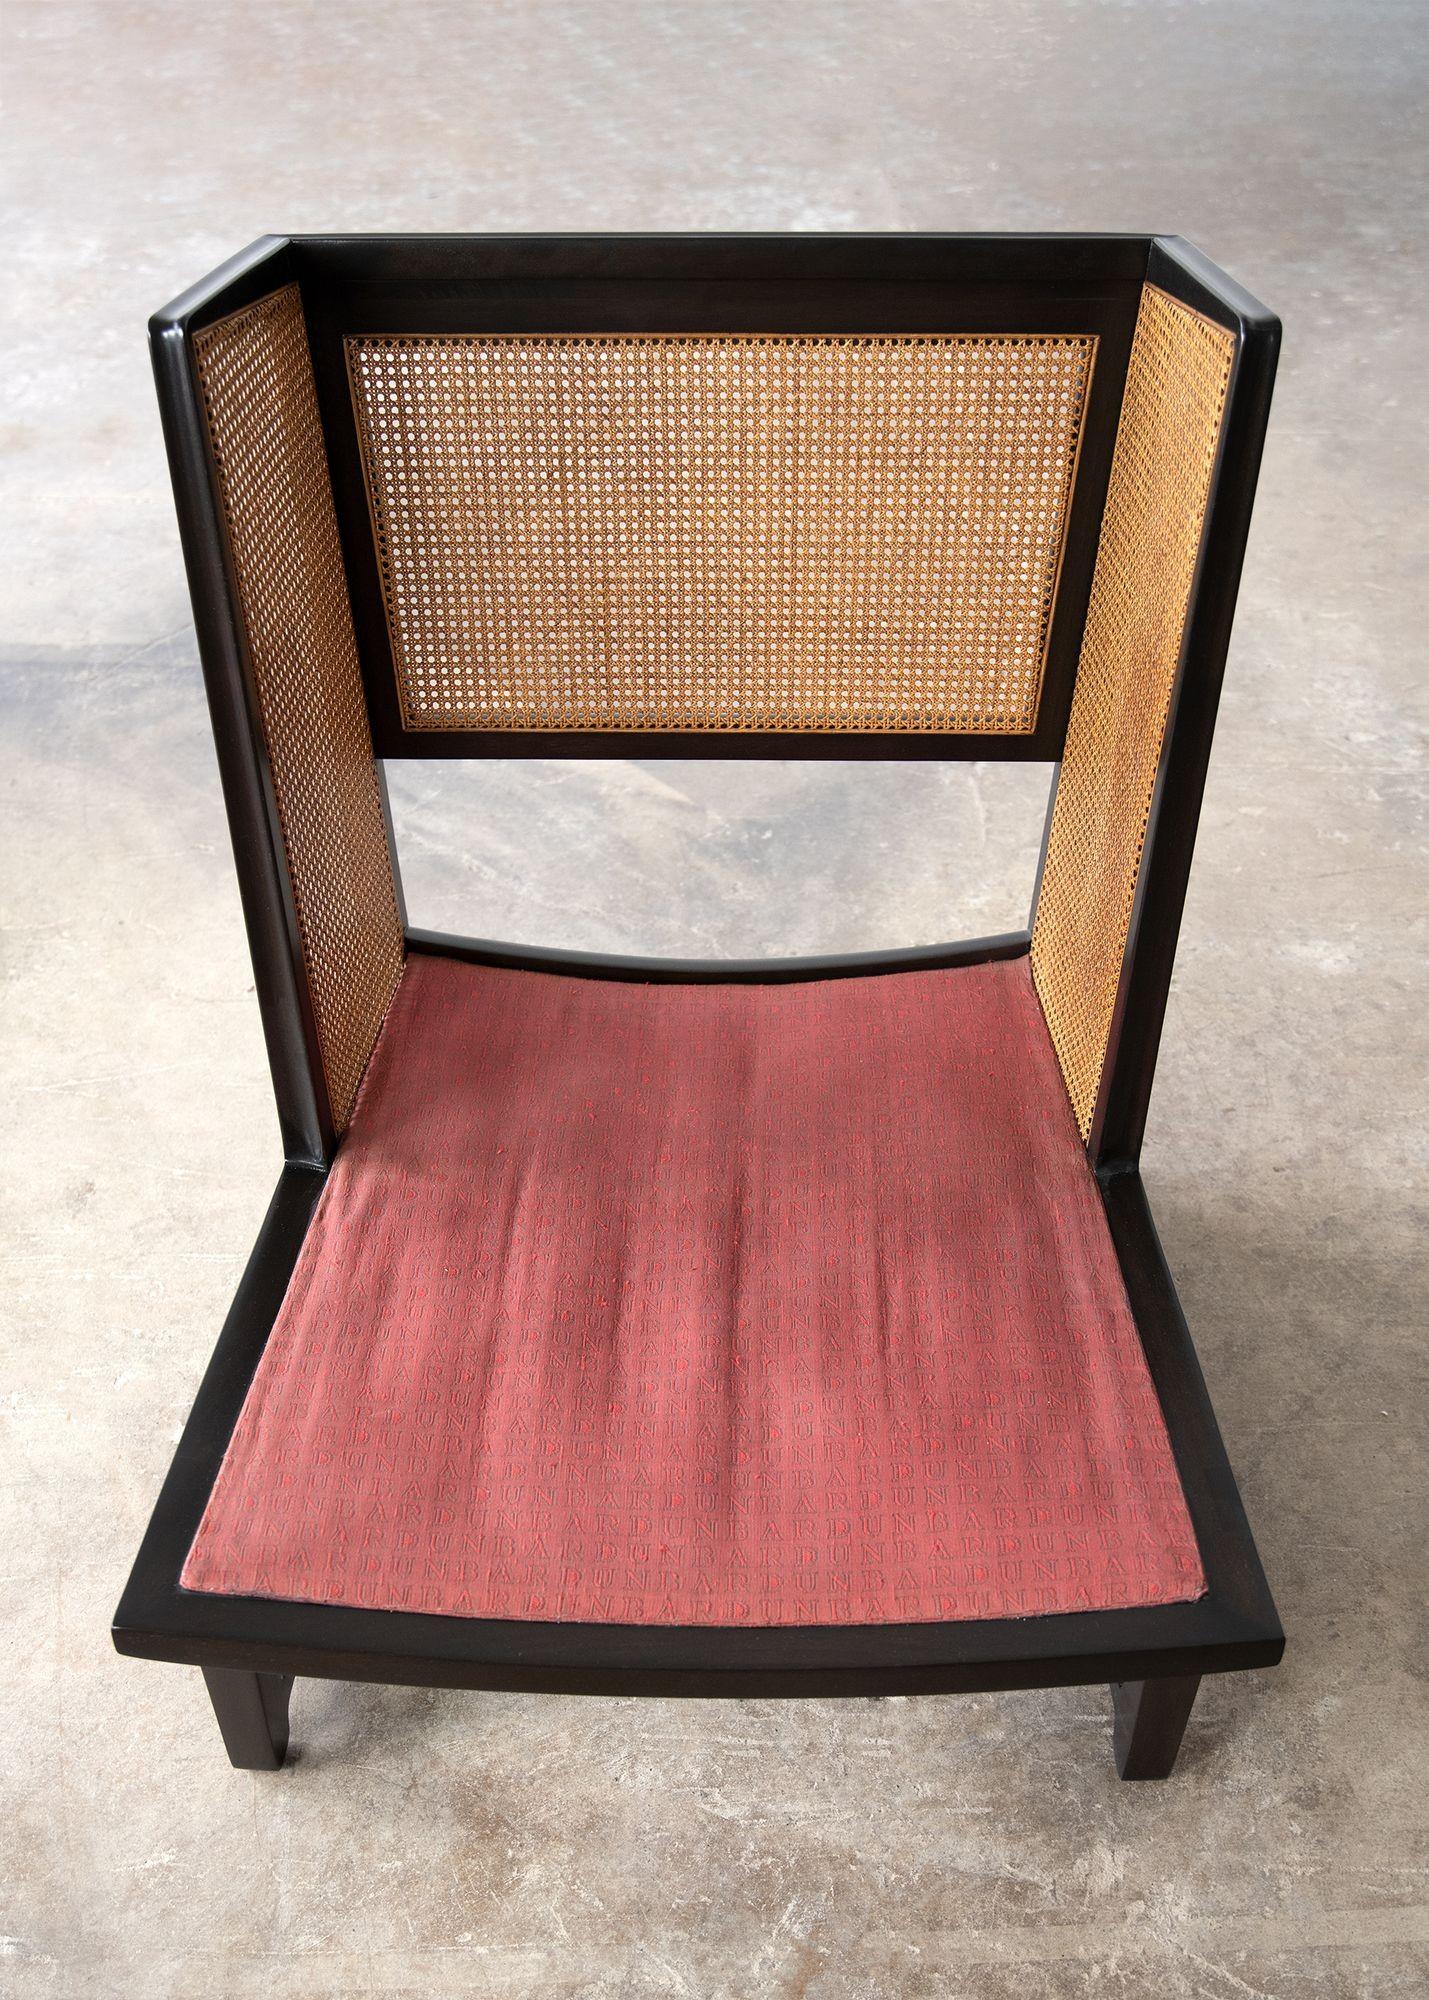 Edward Wormley Wing Lounge Chairs for Dunbar Model 6016 Pair in Cane & Mahogany 8